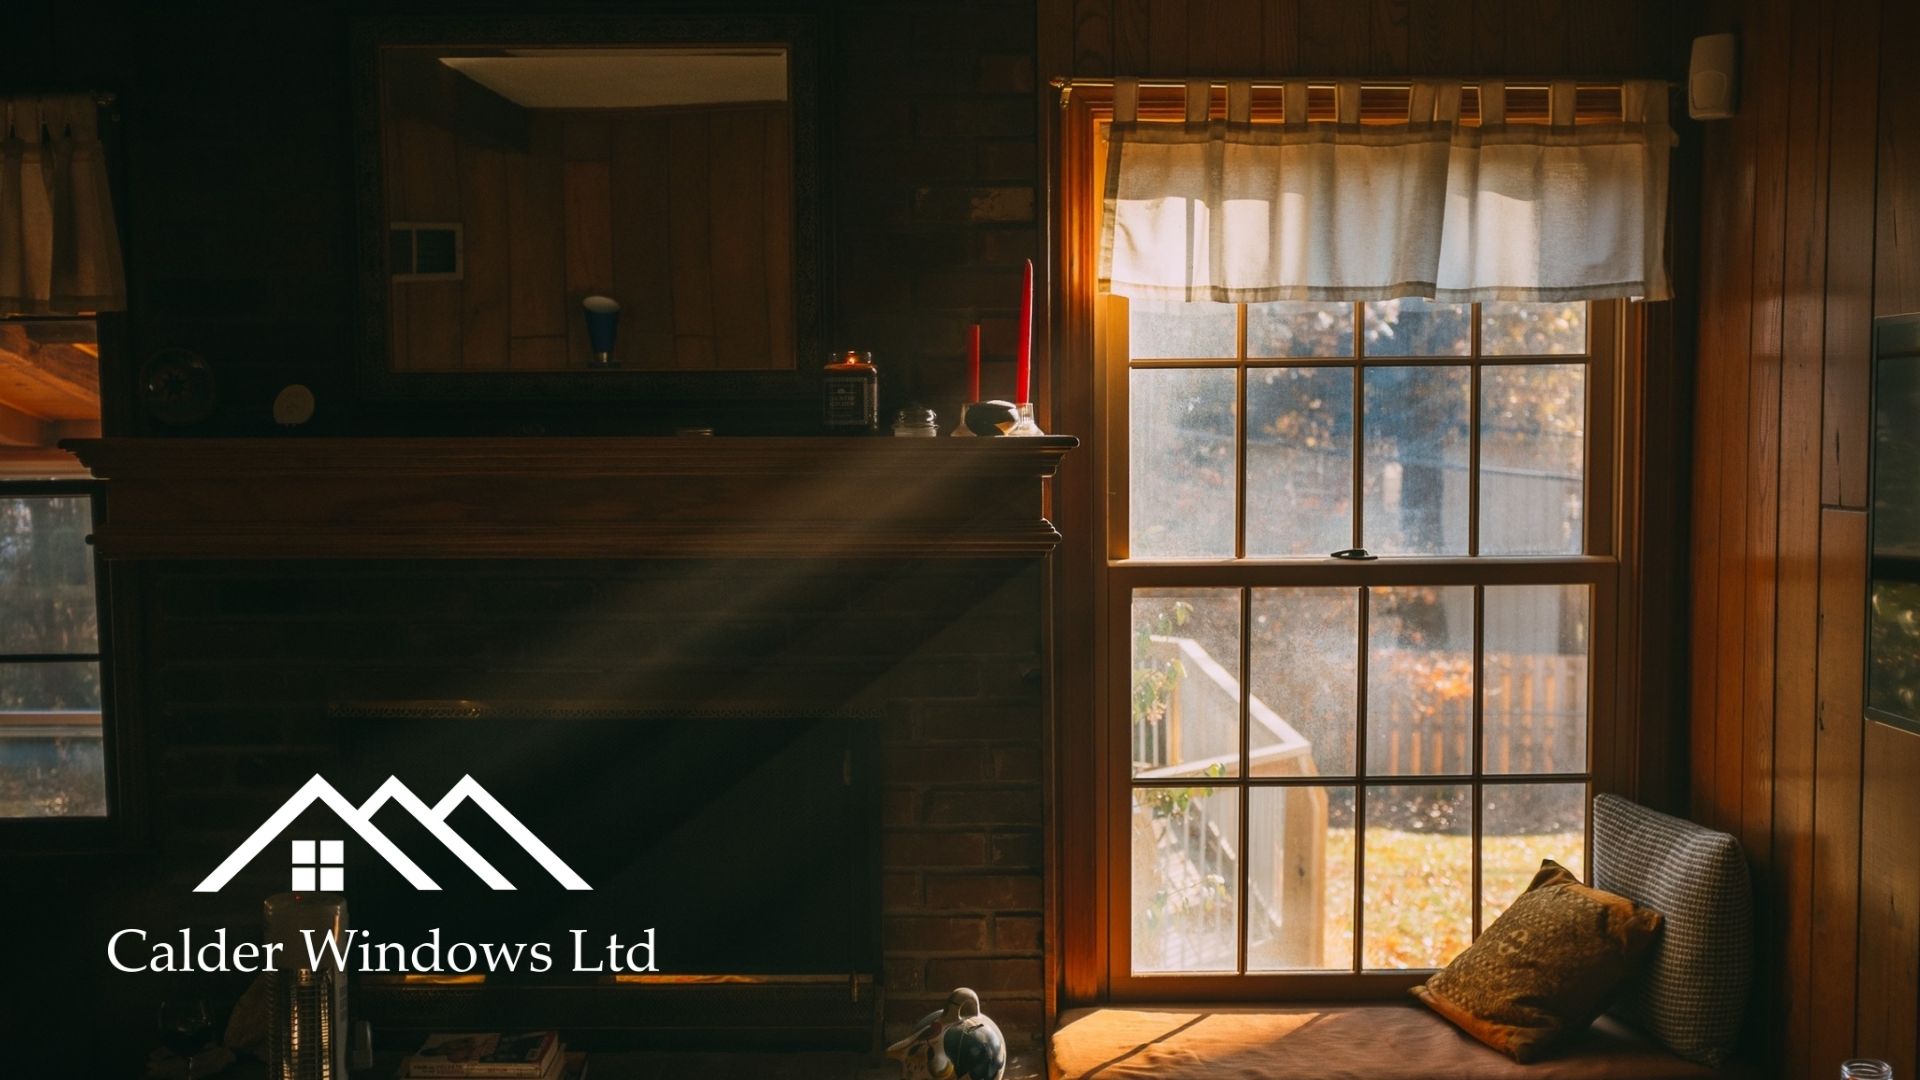 Windows aren't just functional – they also let in natural light, which has a range of health benefits. Find out why windows matter in our article.